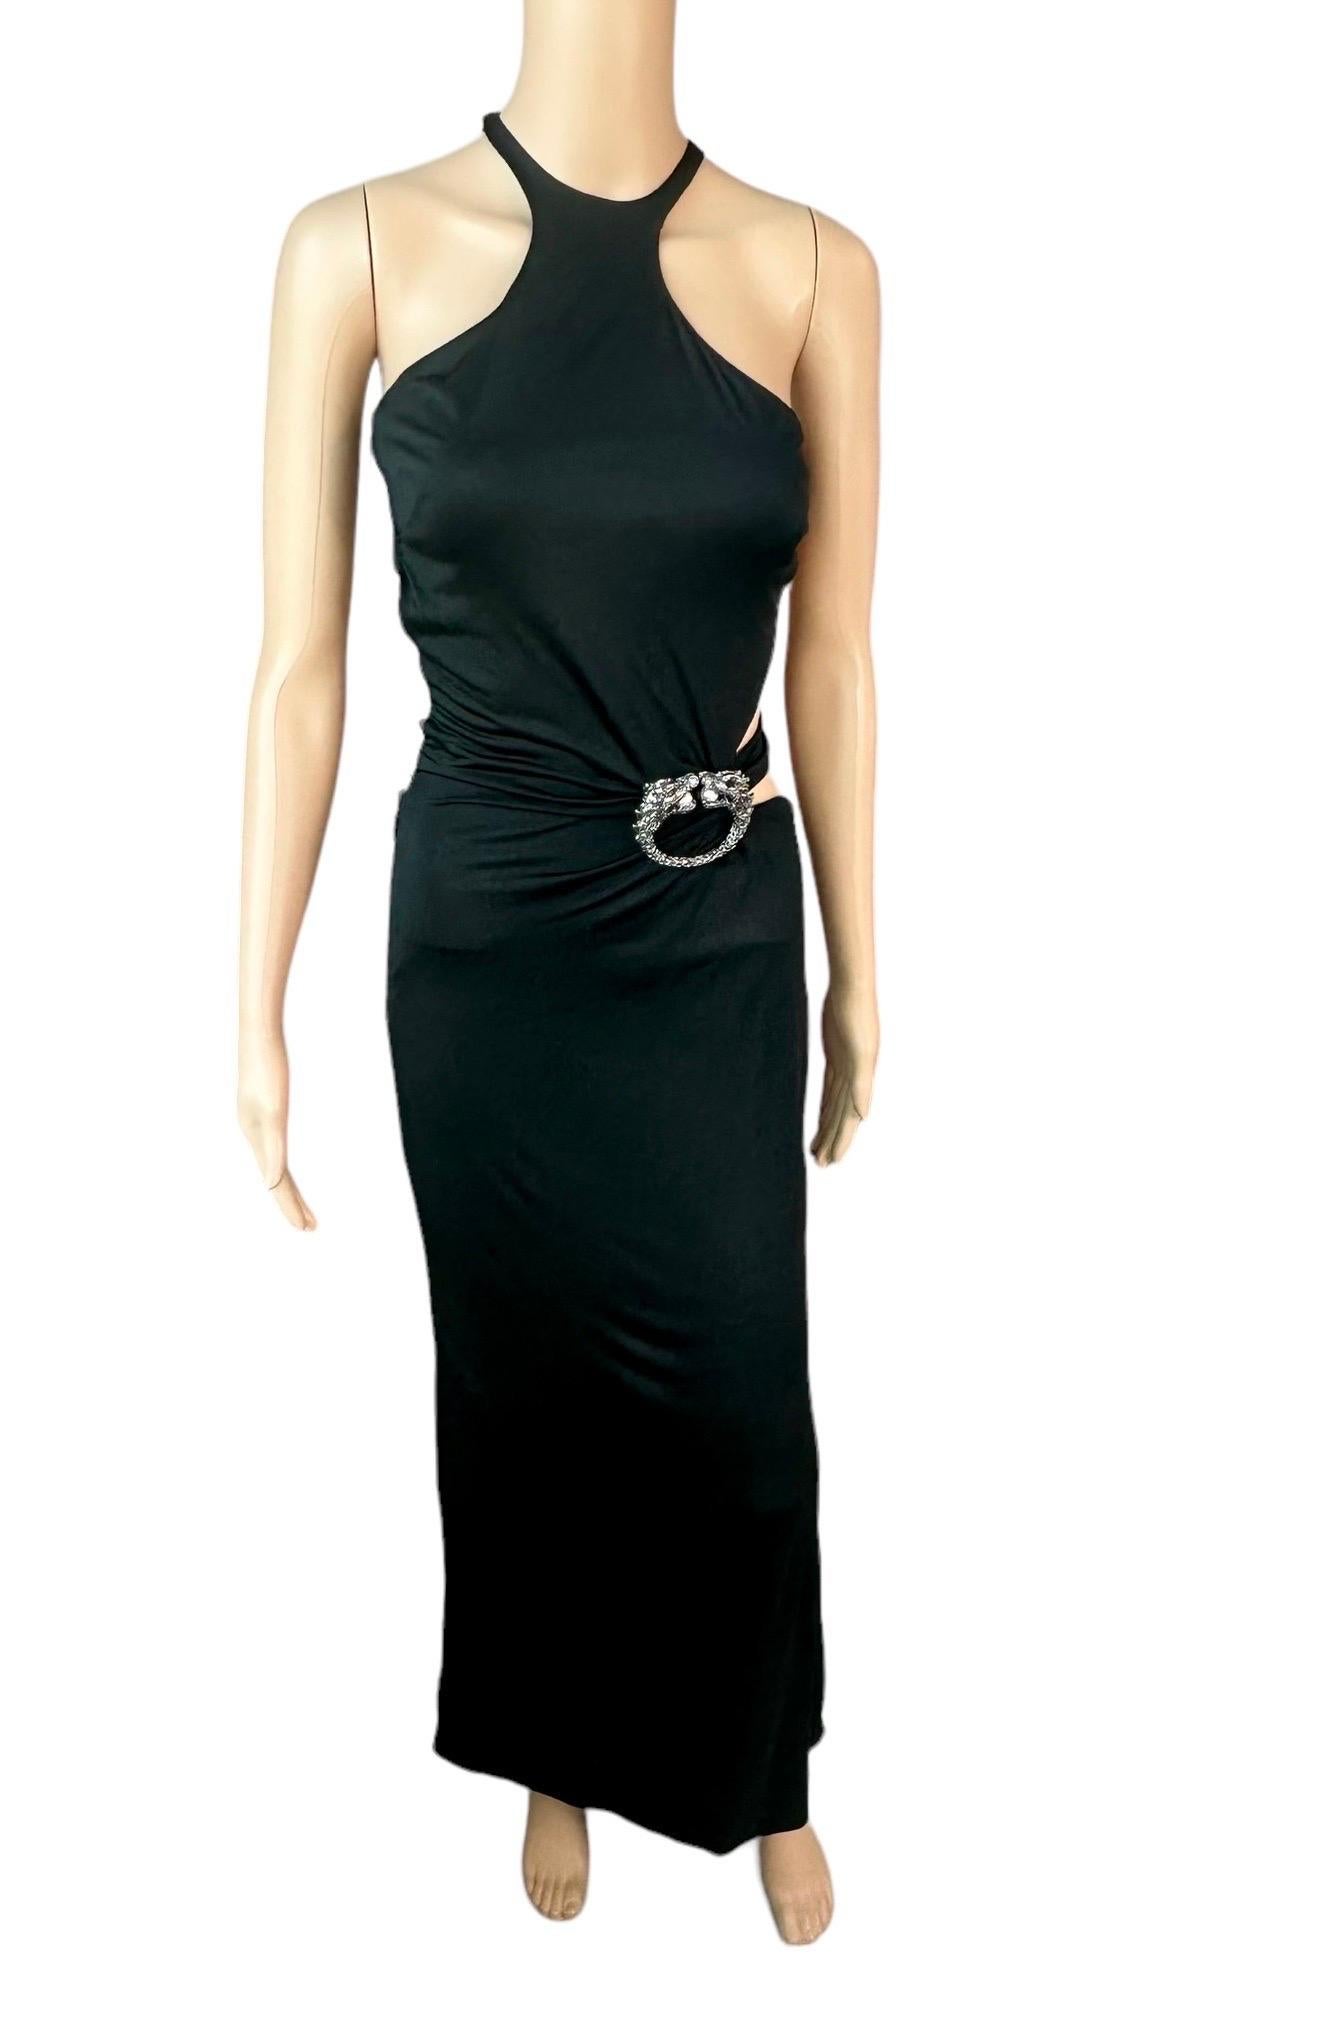 Tom Ford for Gucci F/W 2004 Embellished Plunging Cutout Black Evening Dress Gown 9